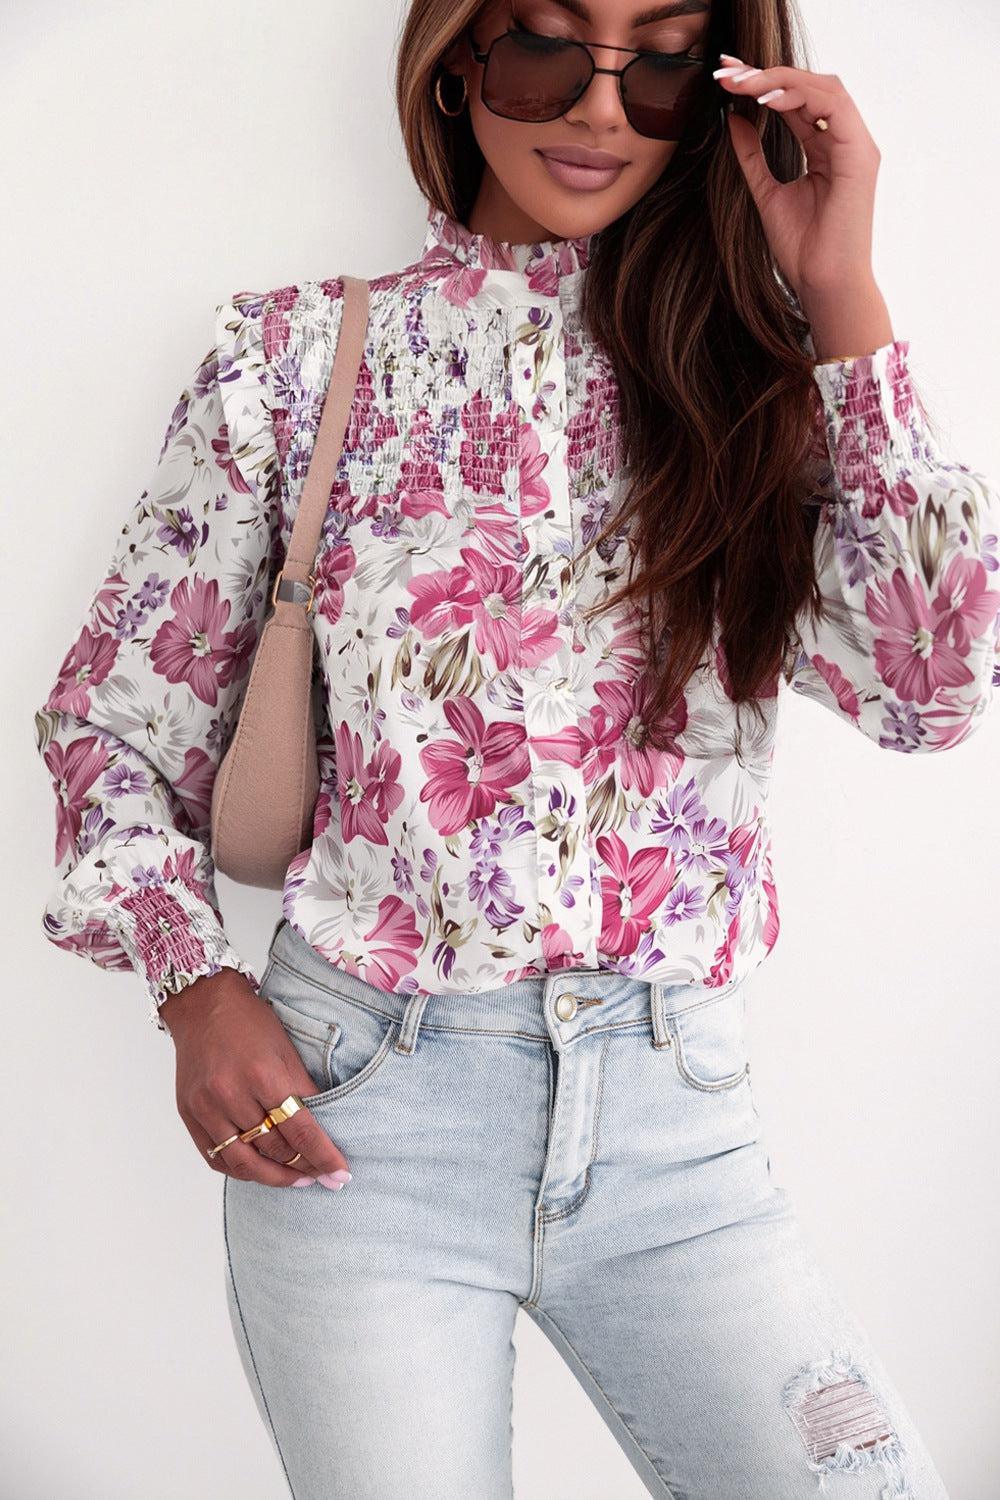 a woman wearing a floral shirt and jeans